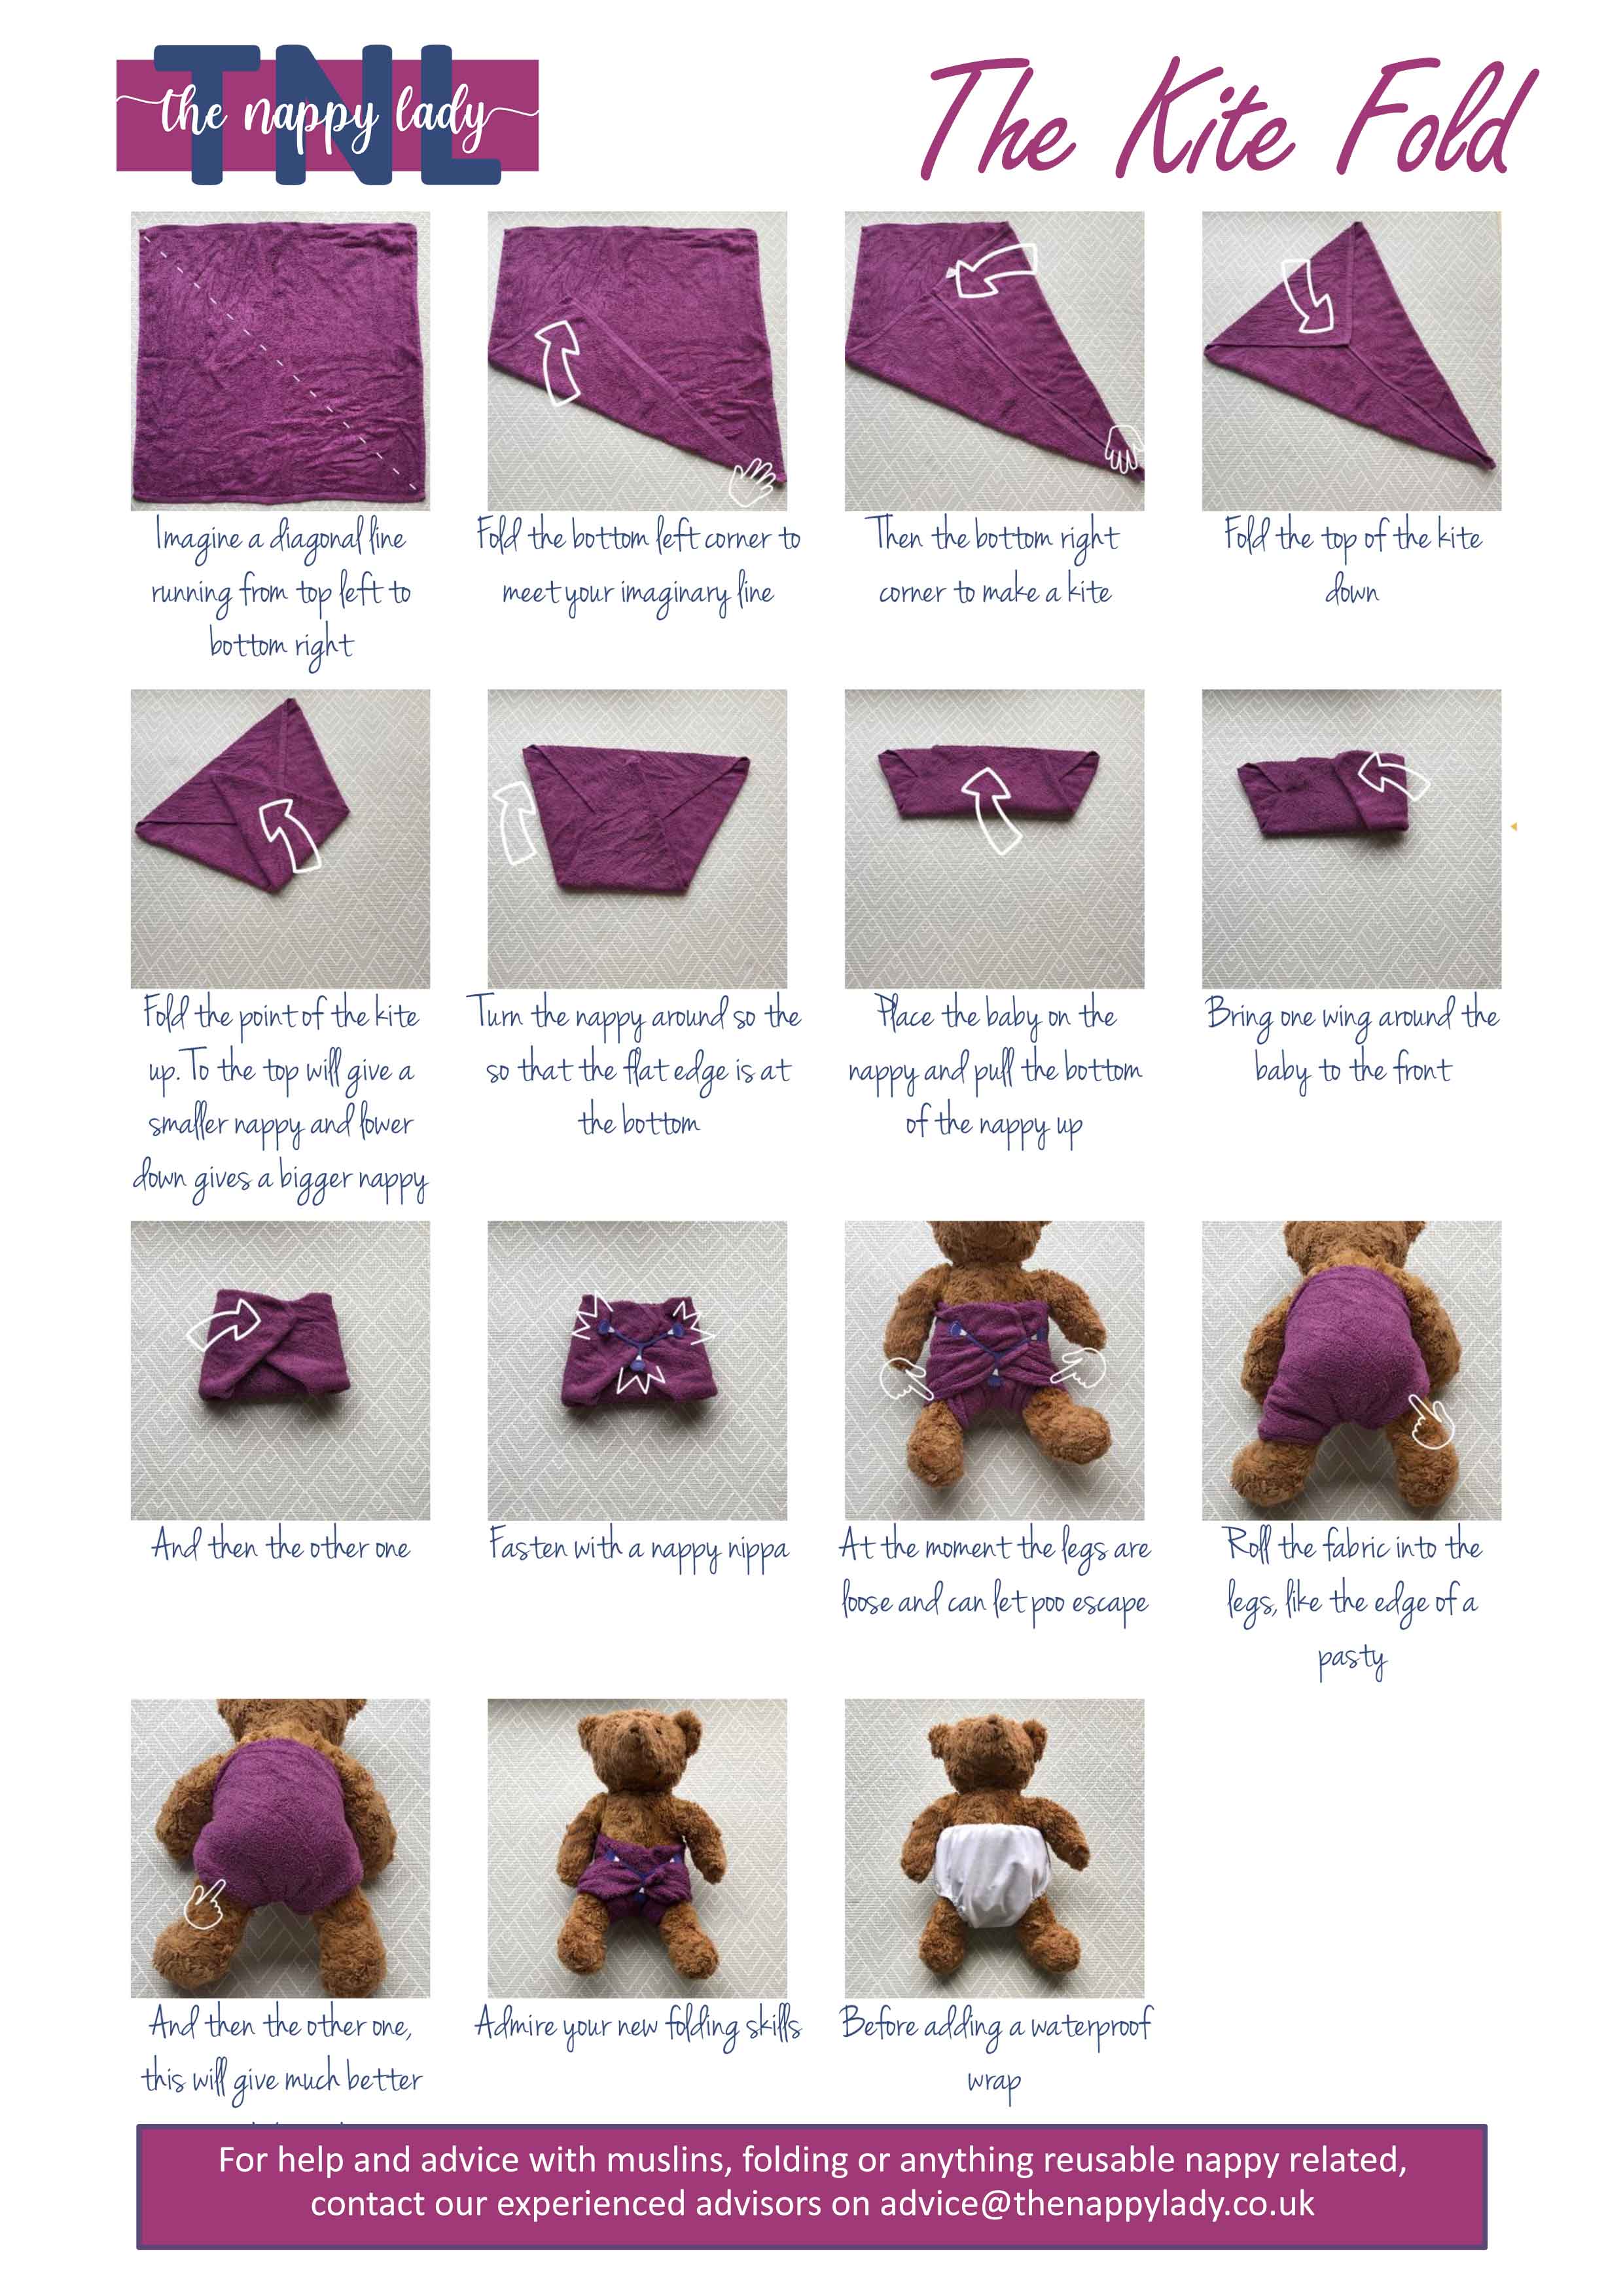 photo diagram of the kite fold for terry nappies